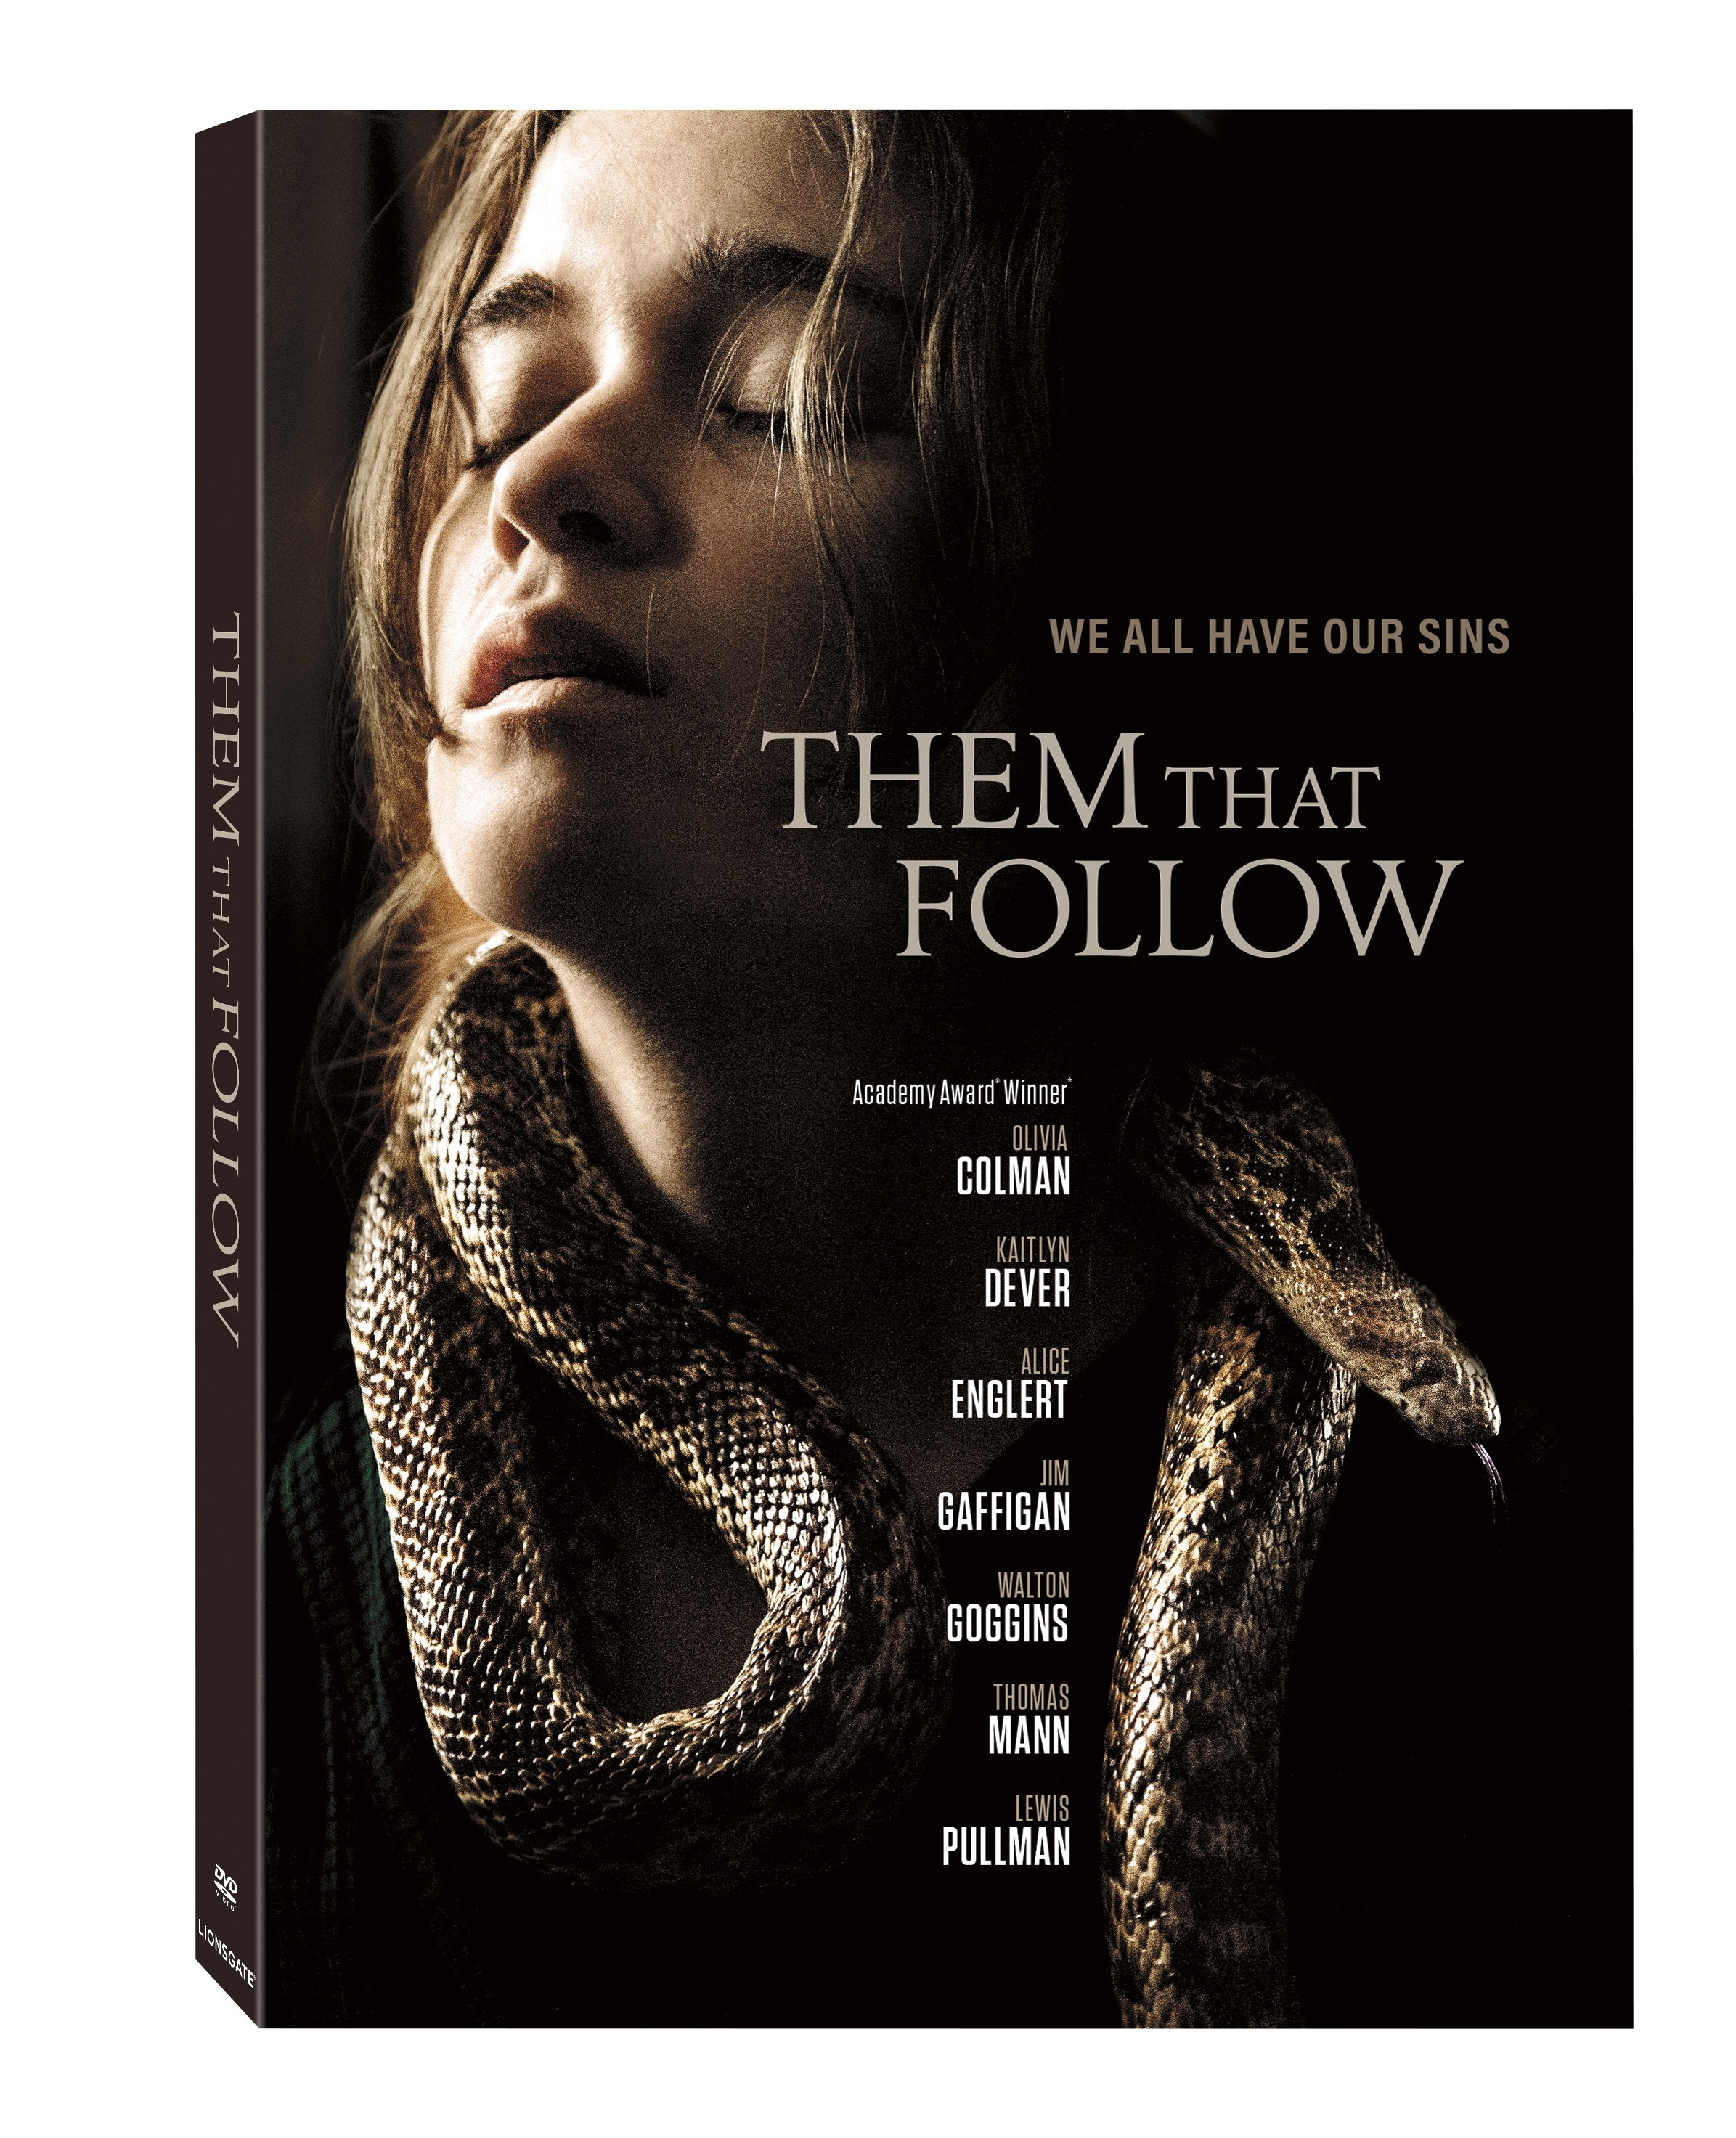 [News] THEM THAT FOLLOW Arrives on DVD on October 29th